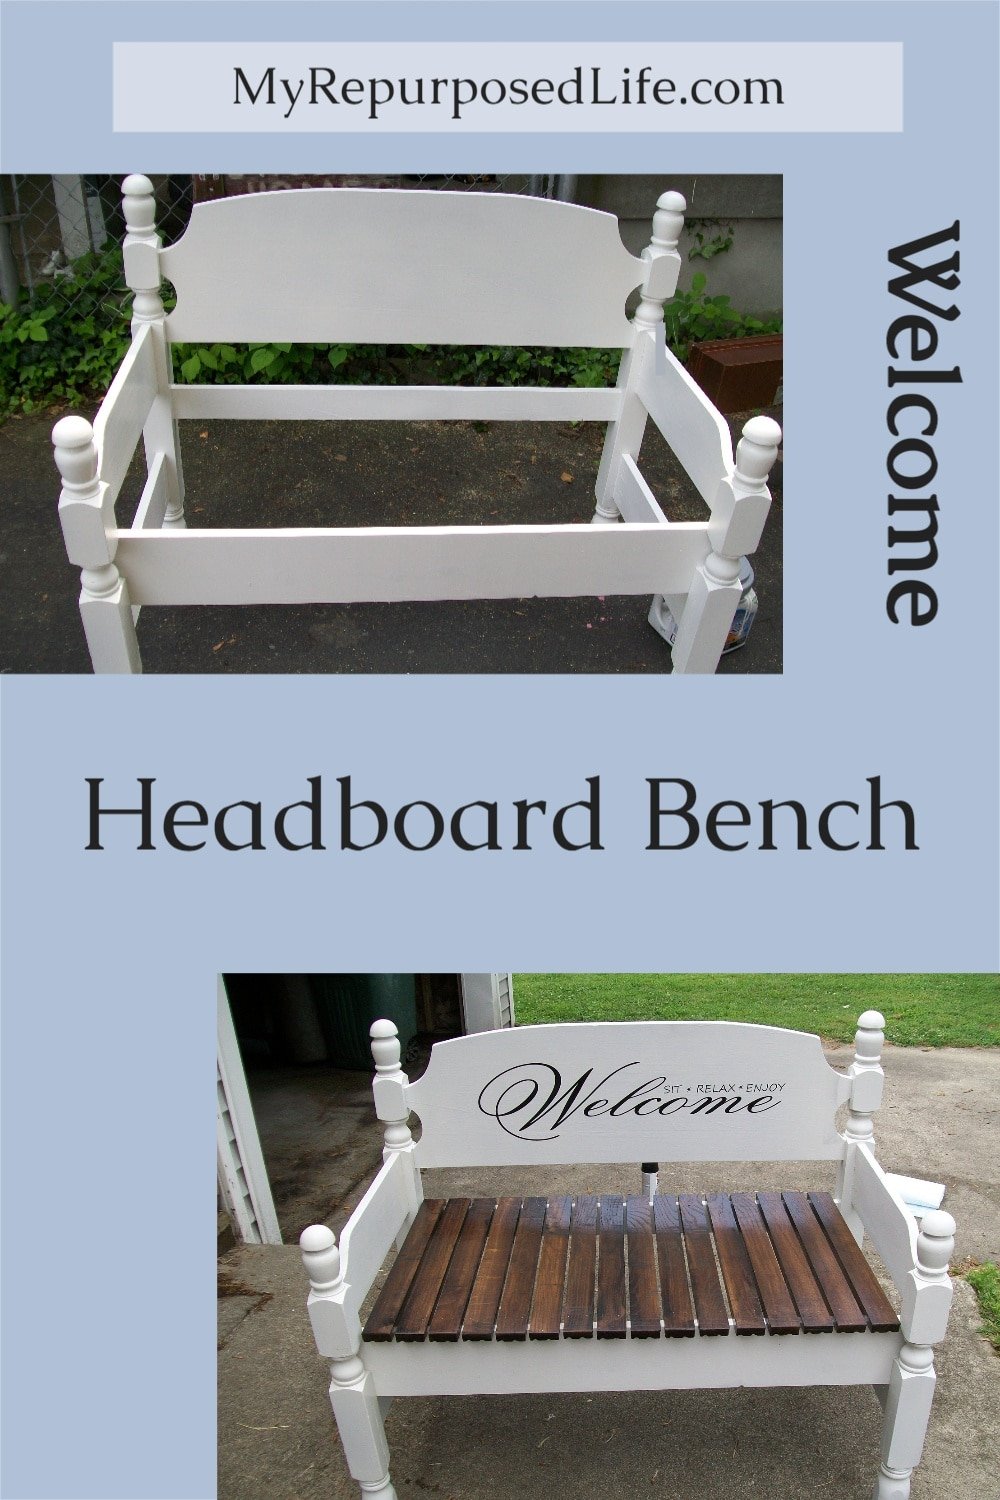 Who doesn't love a great headboard bench? How to make a stenciled bench out of a headboard. Great tips for stenciling with spray paint. #MyRepurposedLife #upcycled #bed #bench via @repurposedlife